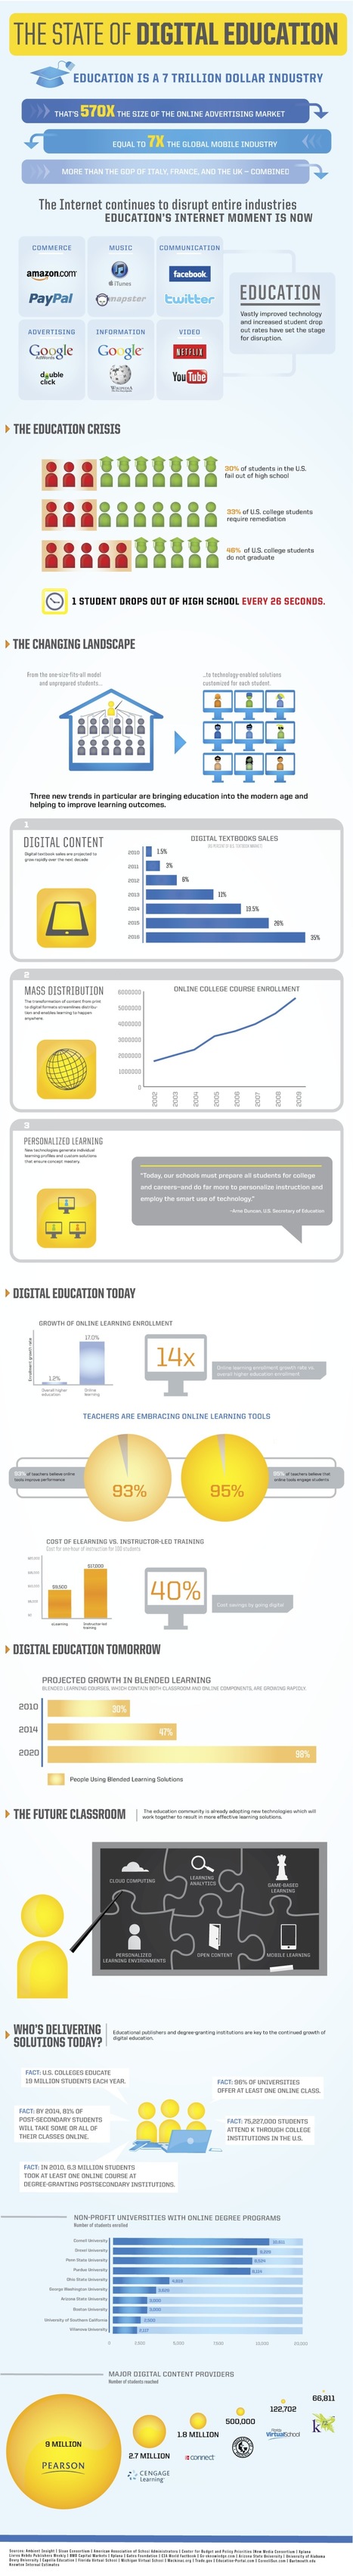 Trends | Infographic: State of Digital Education | Digital Delights | Scoop.it